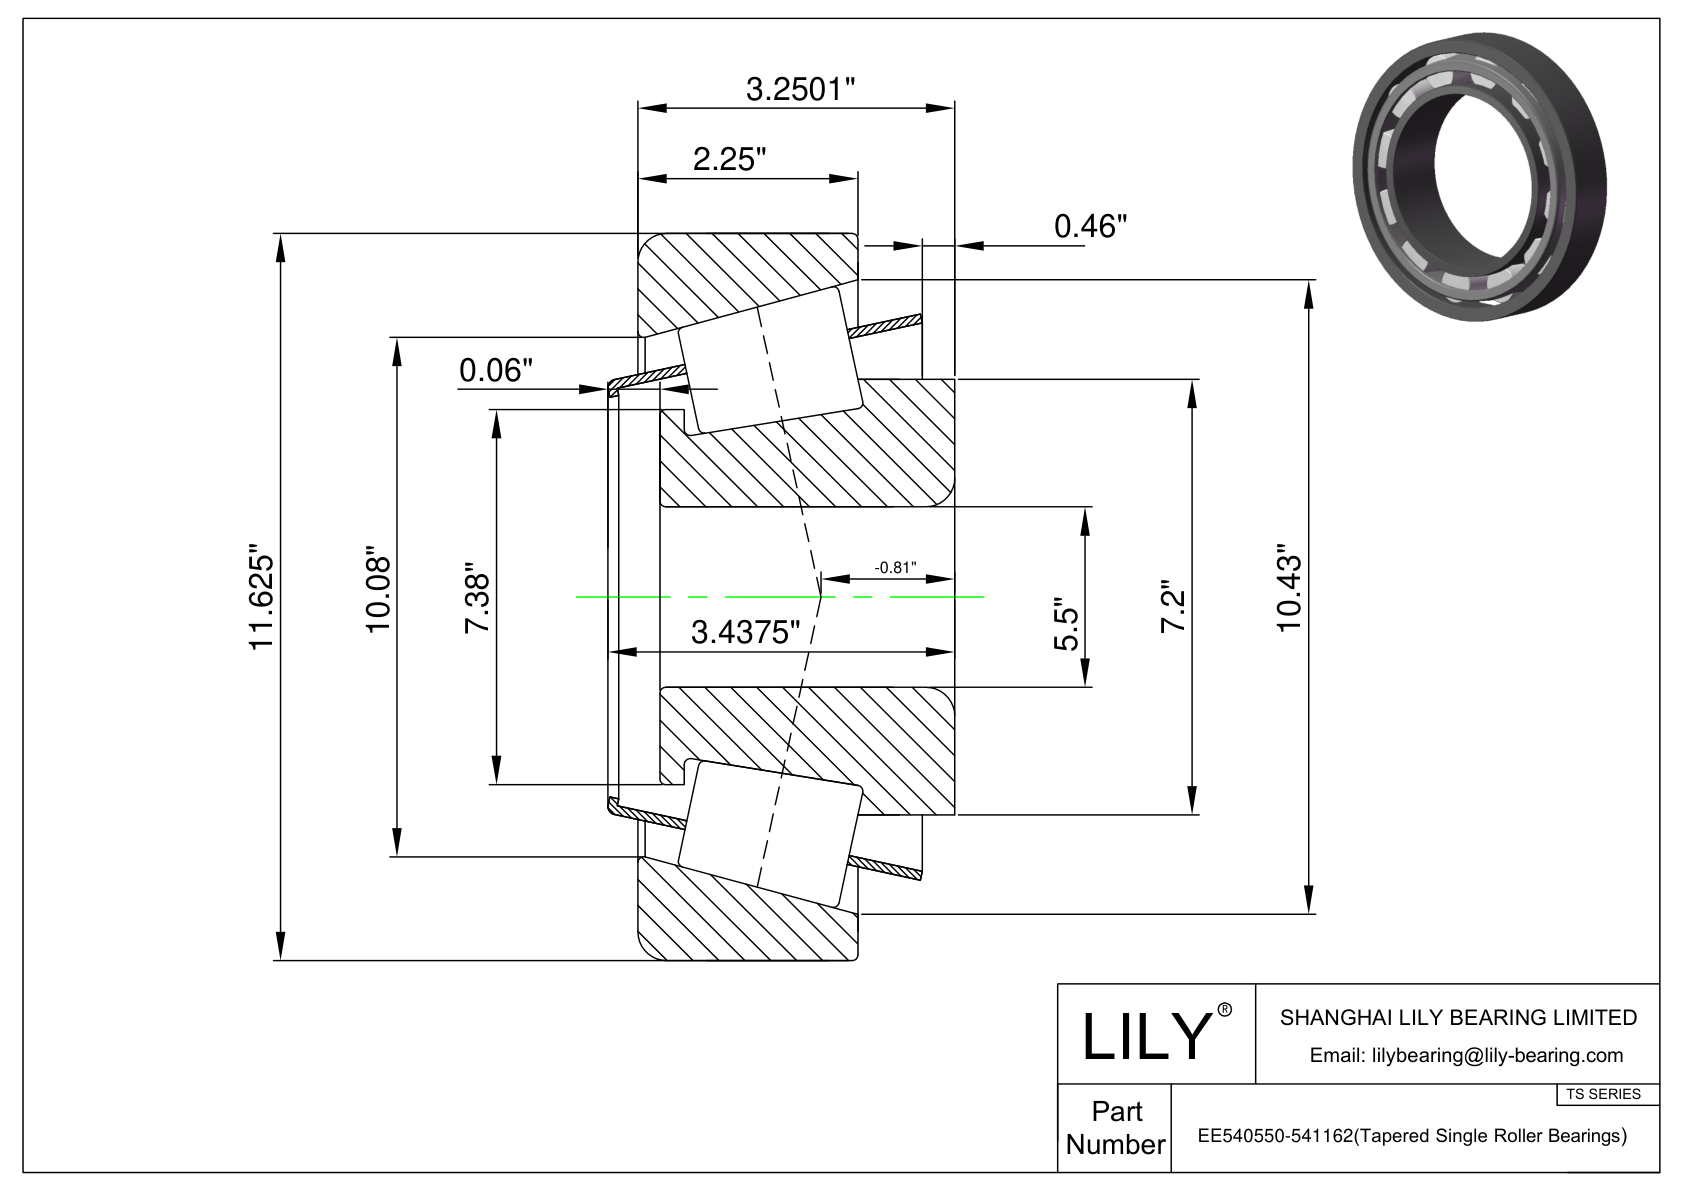 EE540550-541162 TS (Tapered Single Roller Bearings) (Imperial) cad drawing